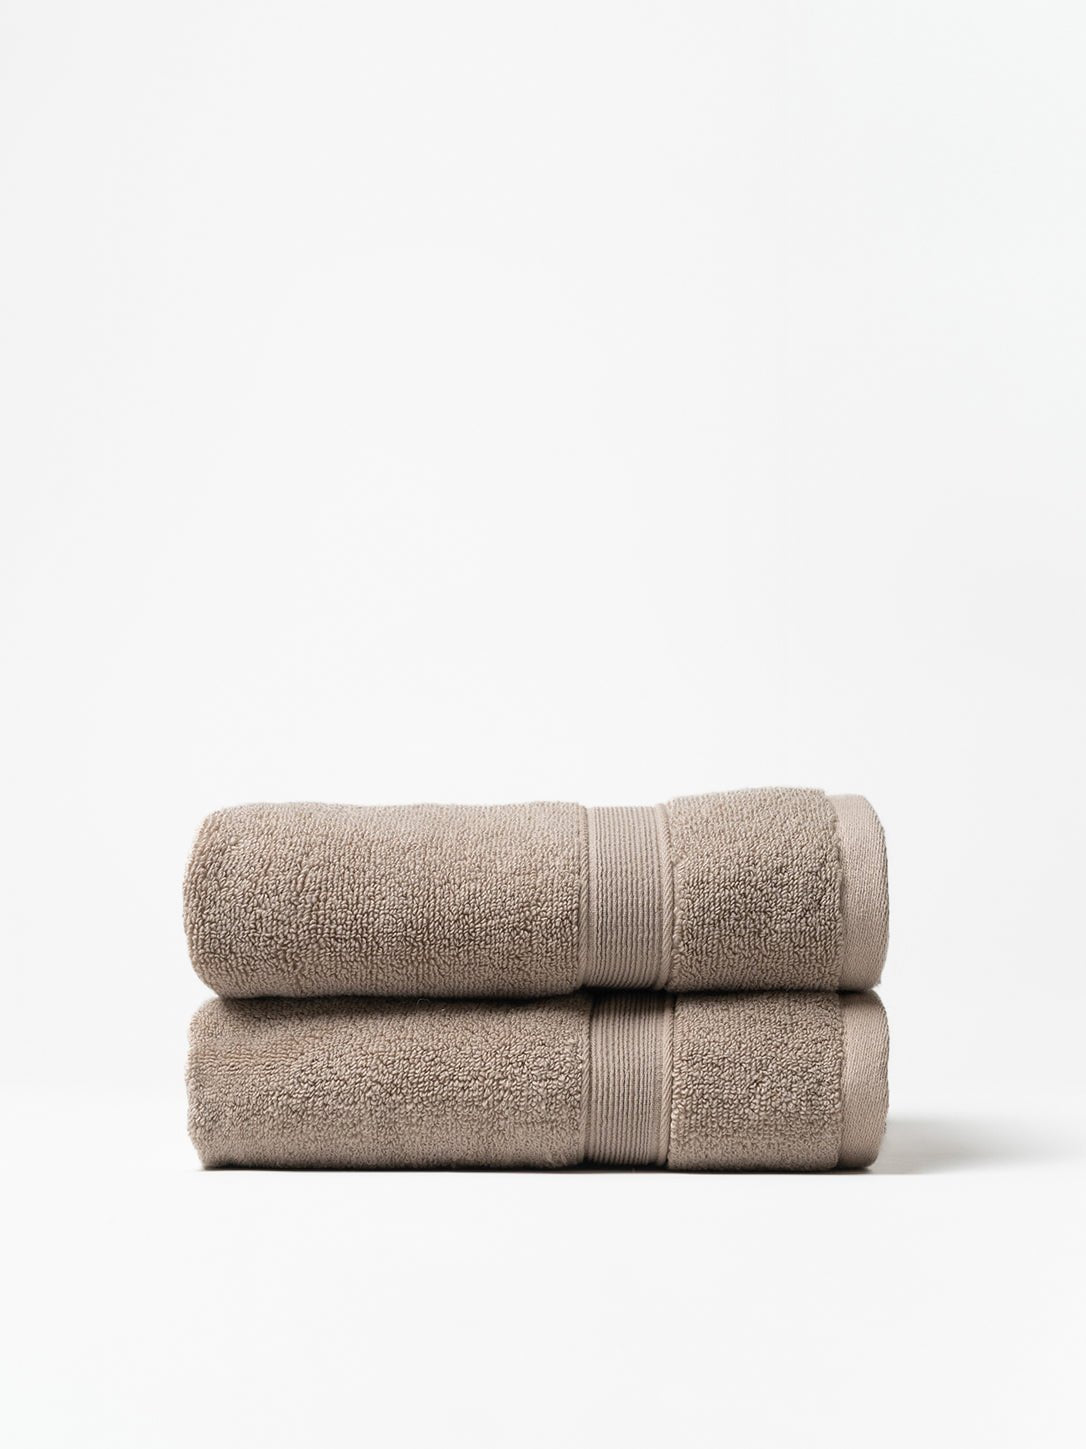 Sand hand towels folded with white background 